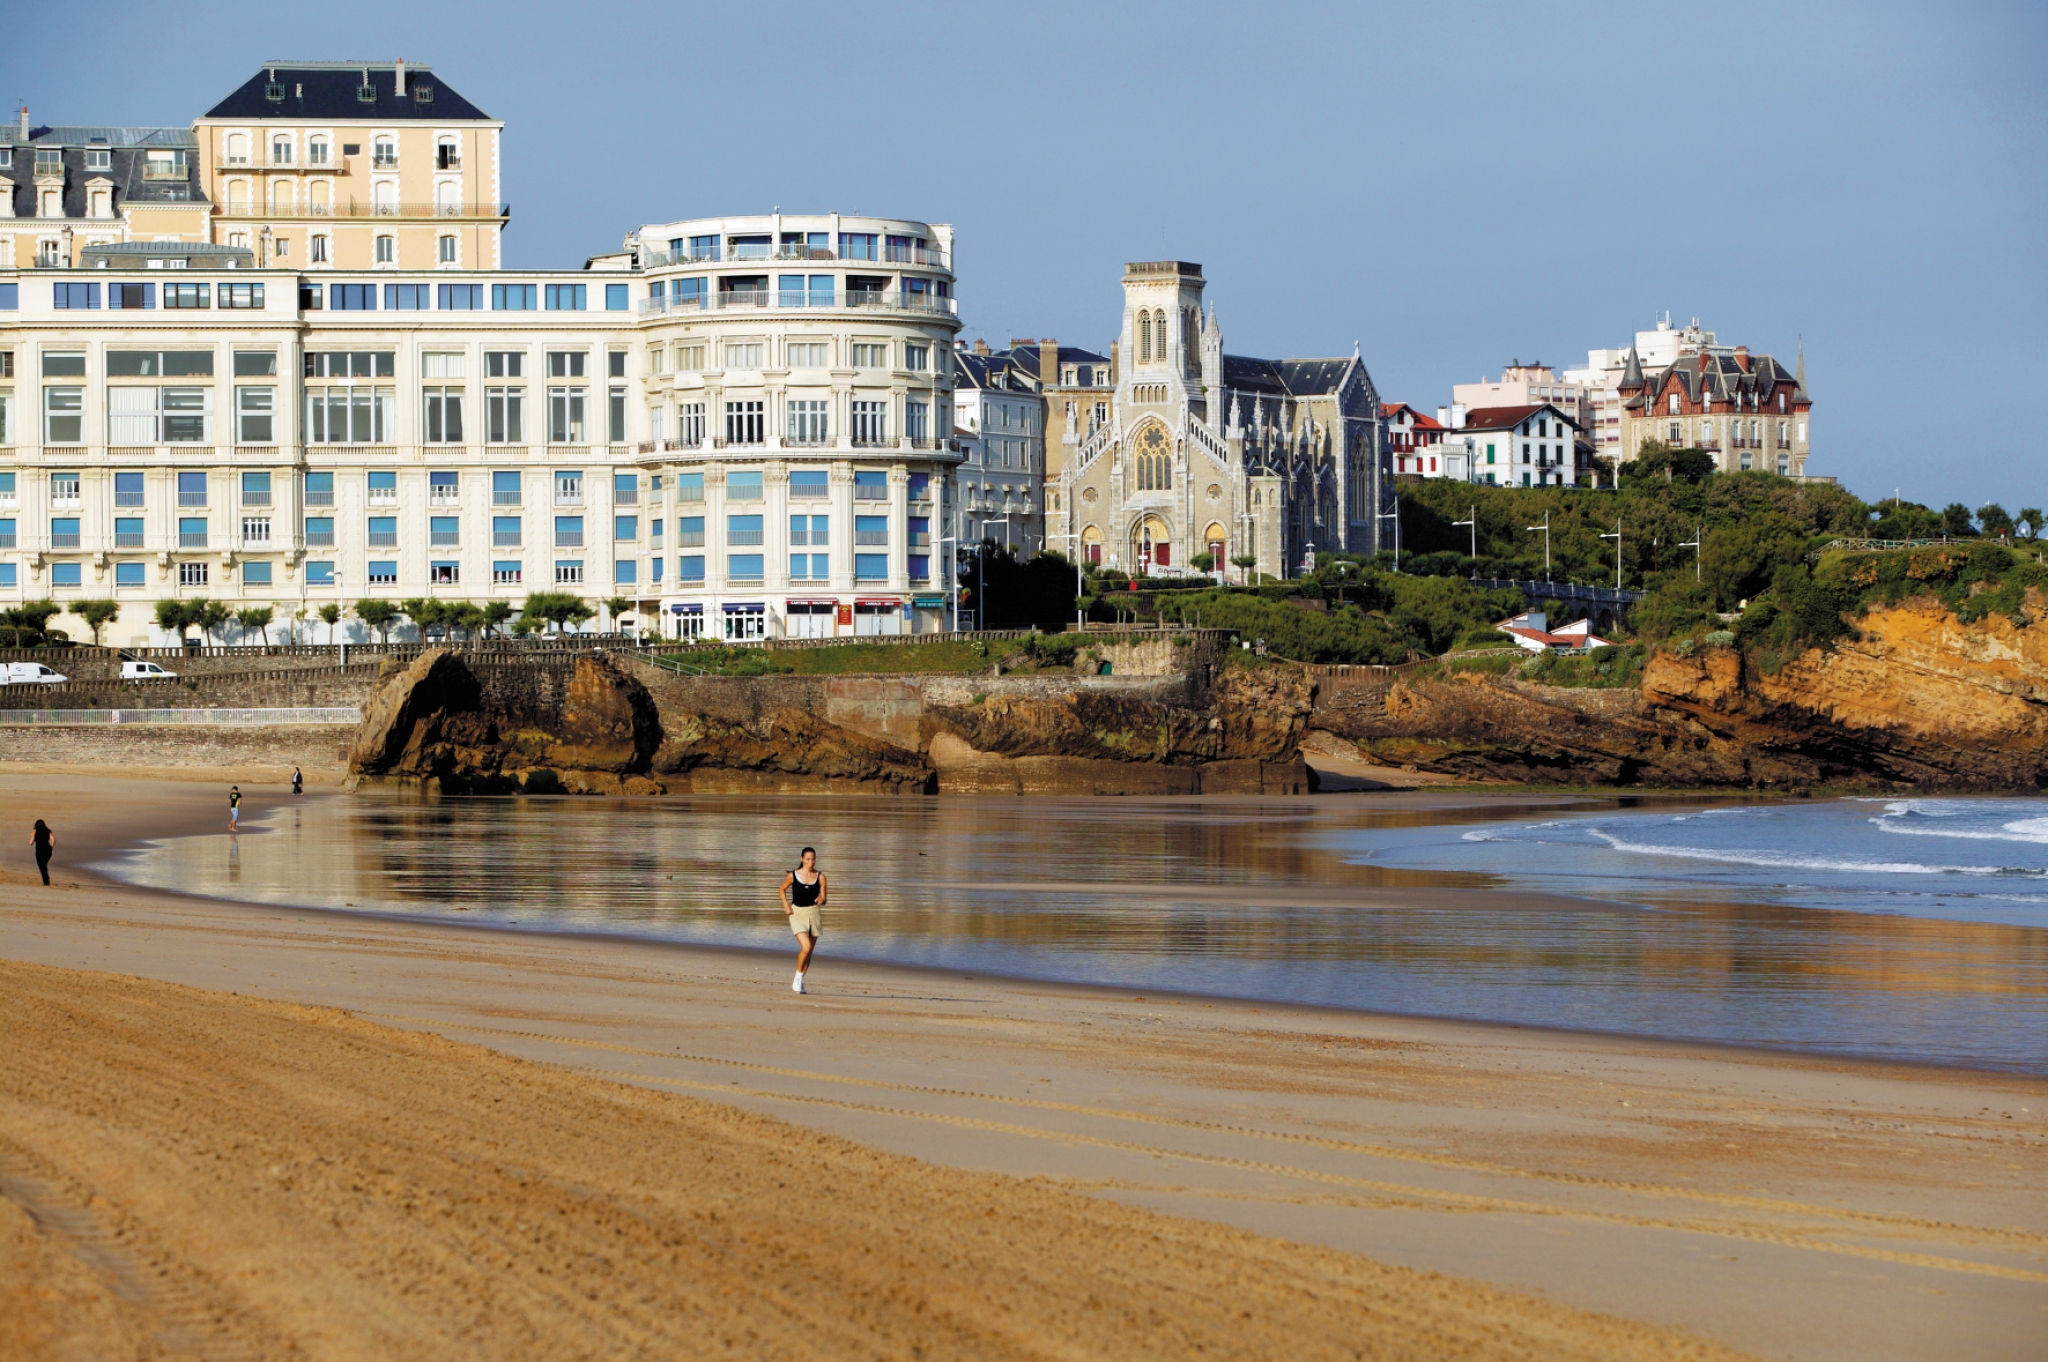 Biarritz: A Gateway to the Pyrenees